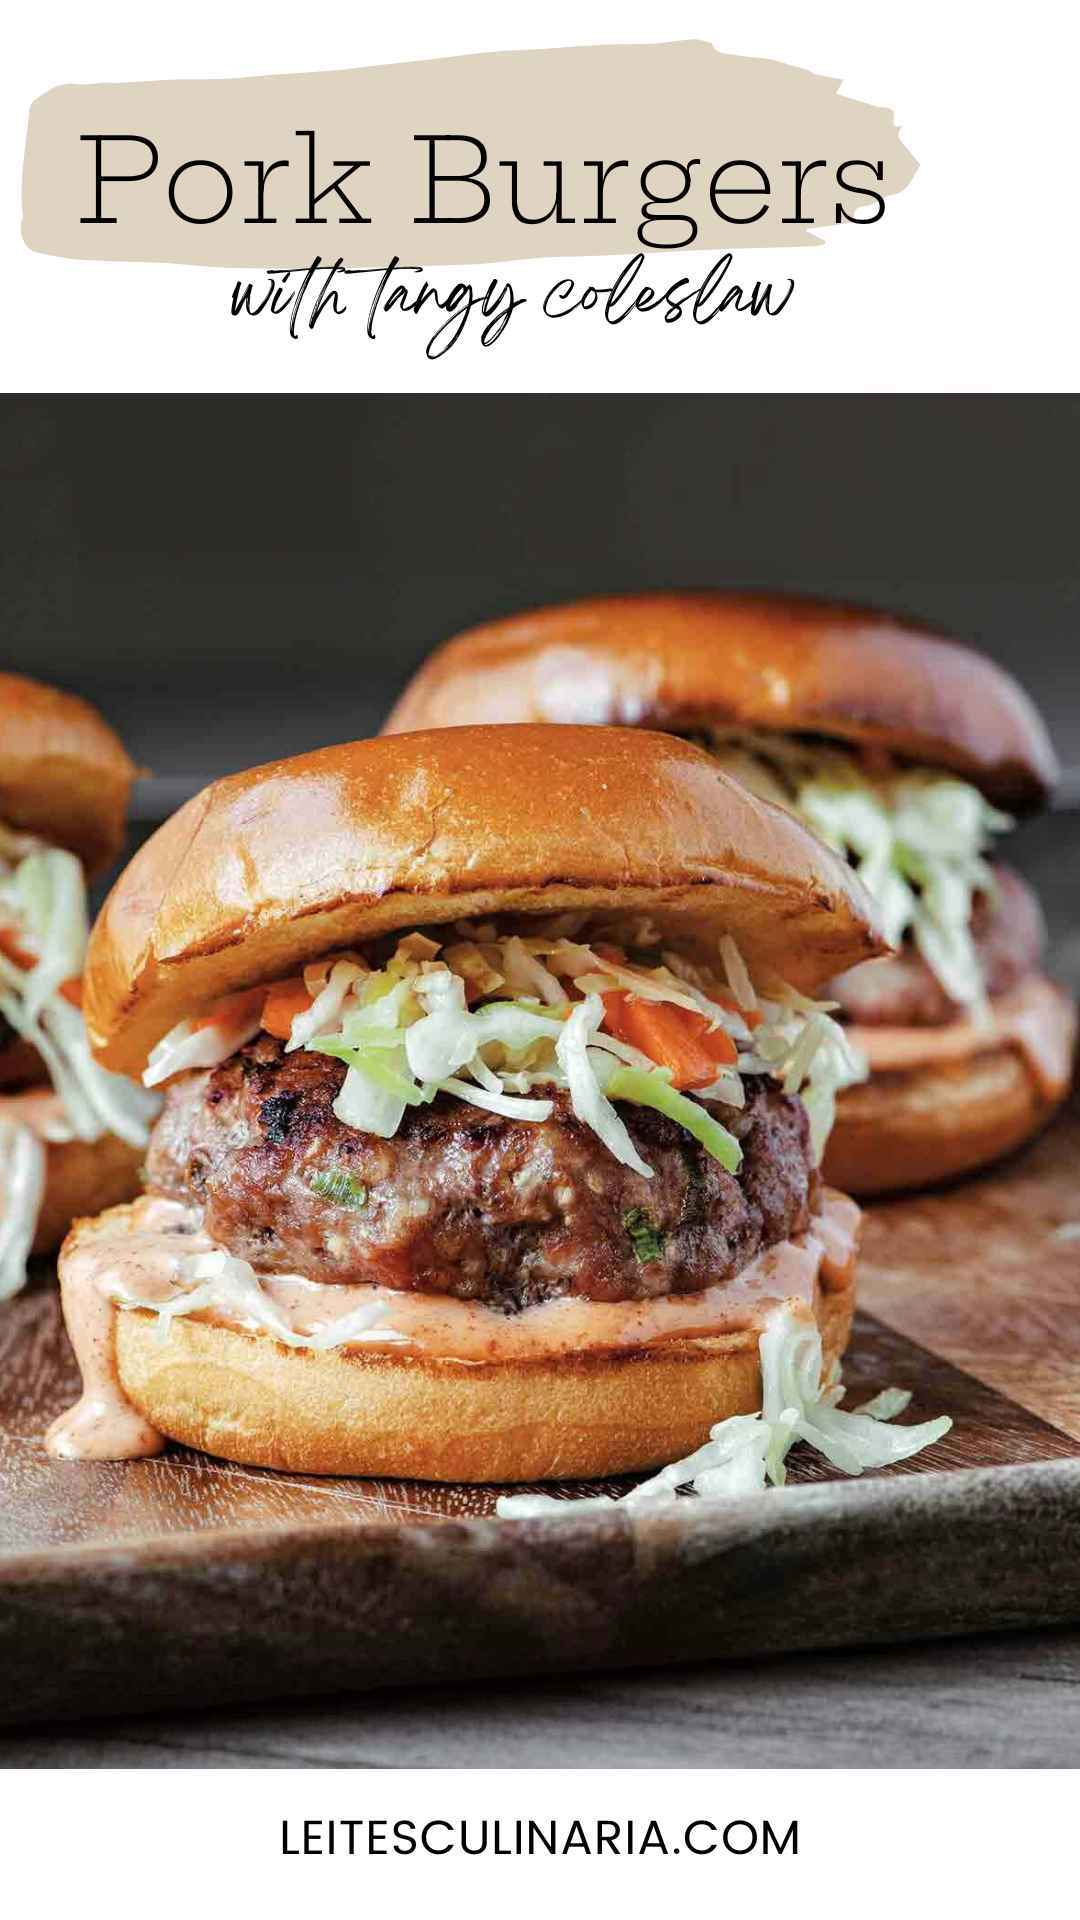 Three grilled pork burgers topped with slaw on toasted buns.